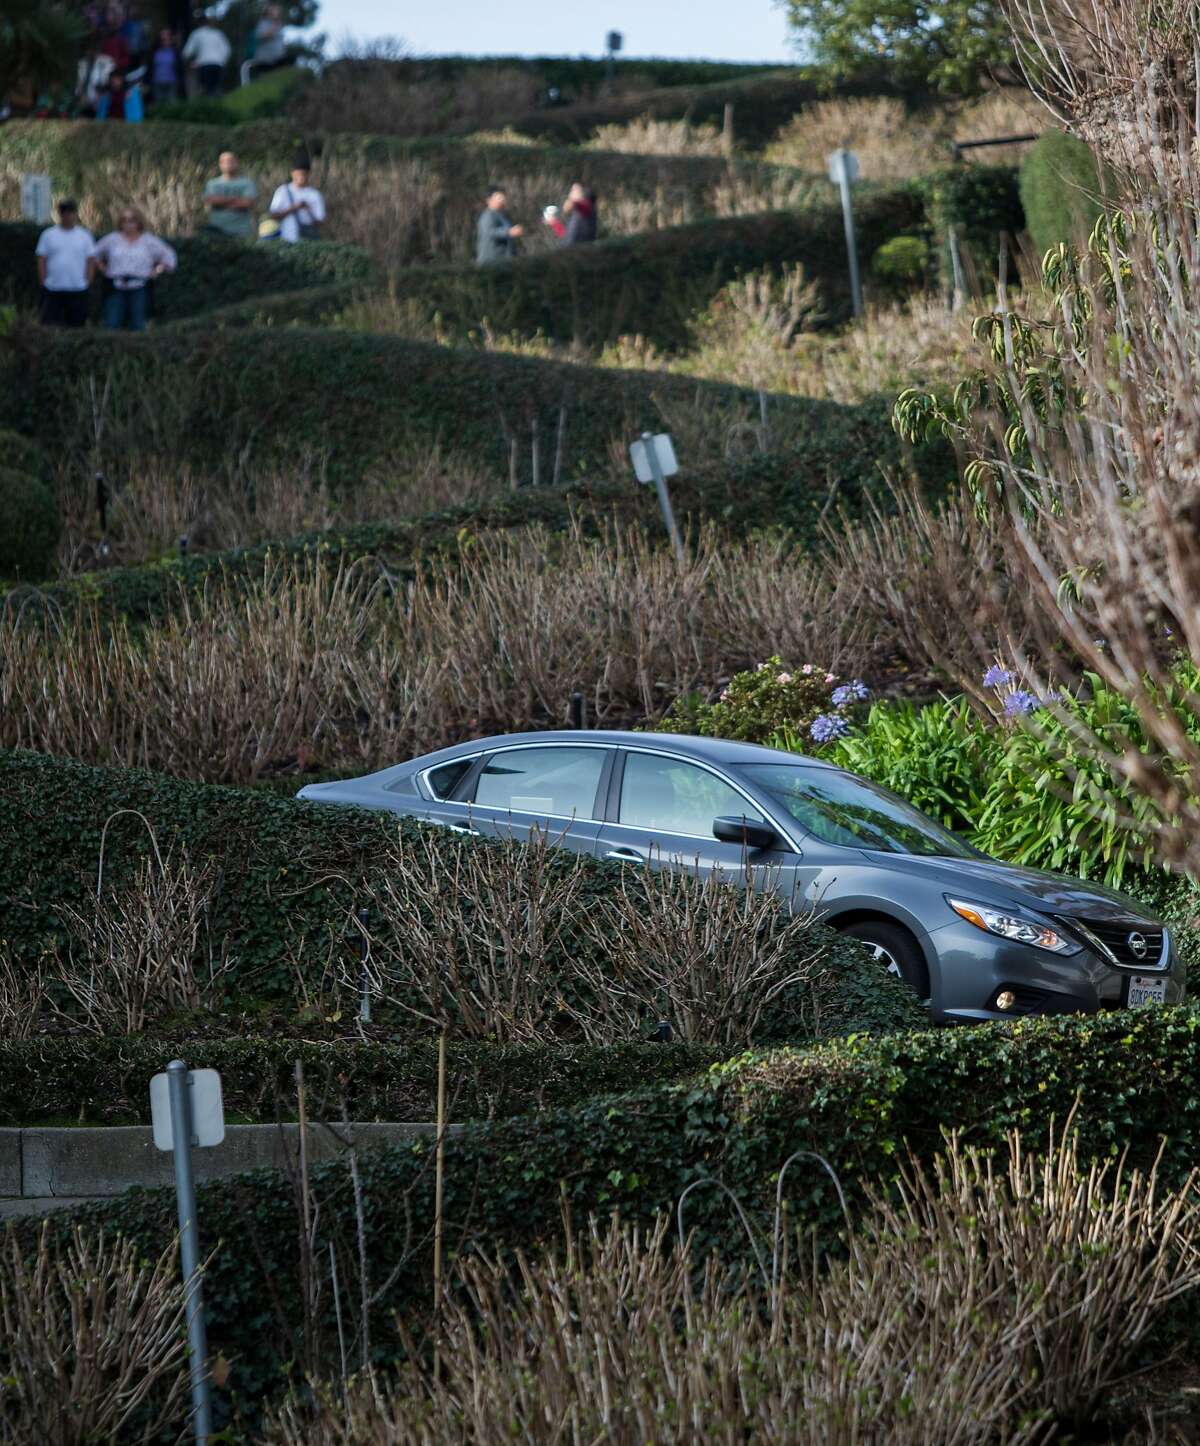 Cars drive down the famously crooked portion of Lombard Street in San Francisco, Calif. Saturday, Jan. 26, 2019.